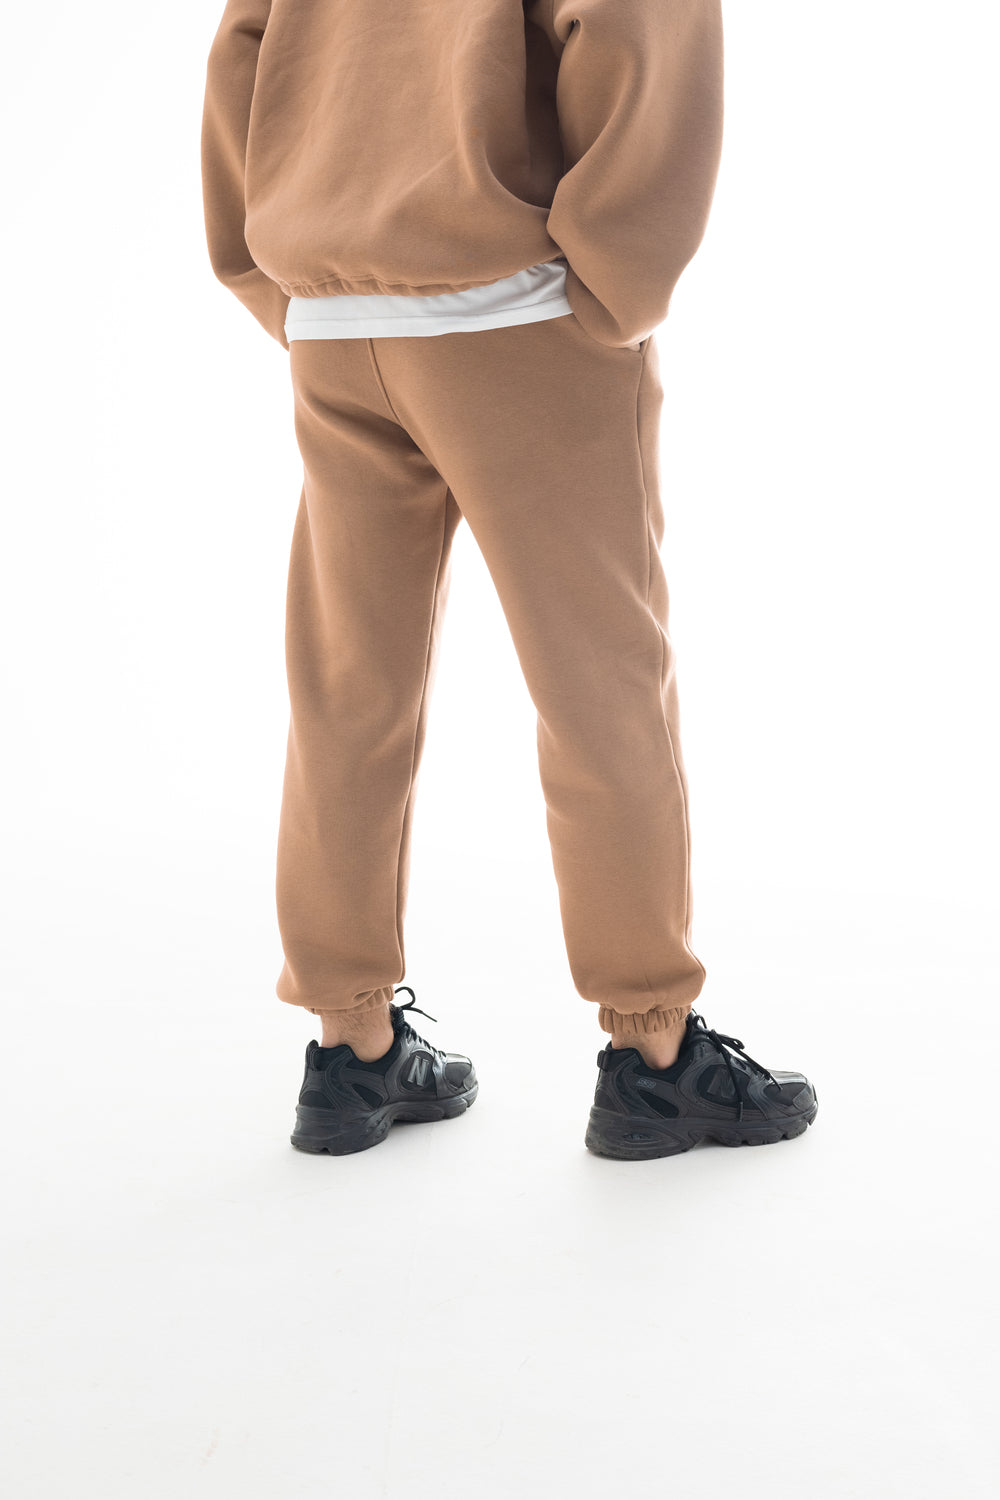 JOGGERS OVERSIZED ULTRA BROWN - Morning Star